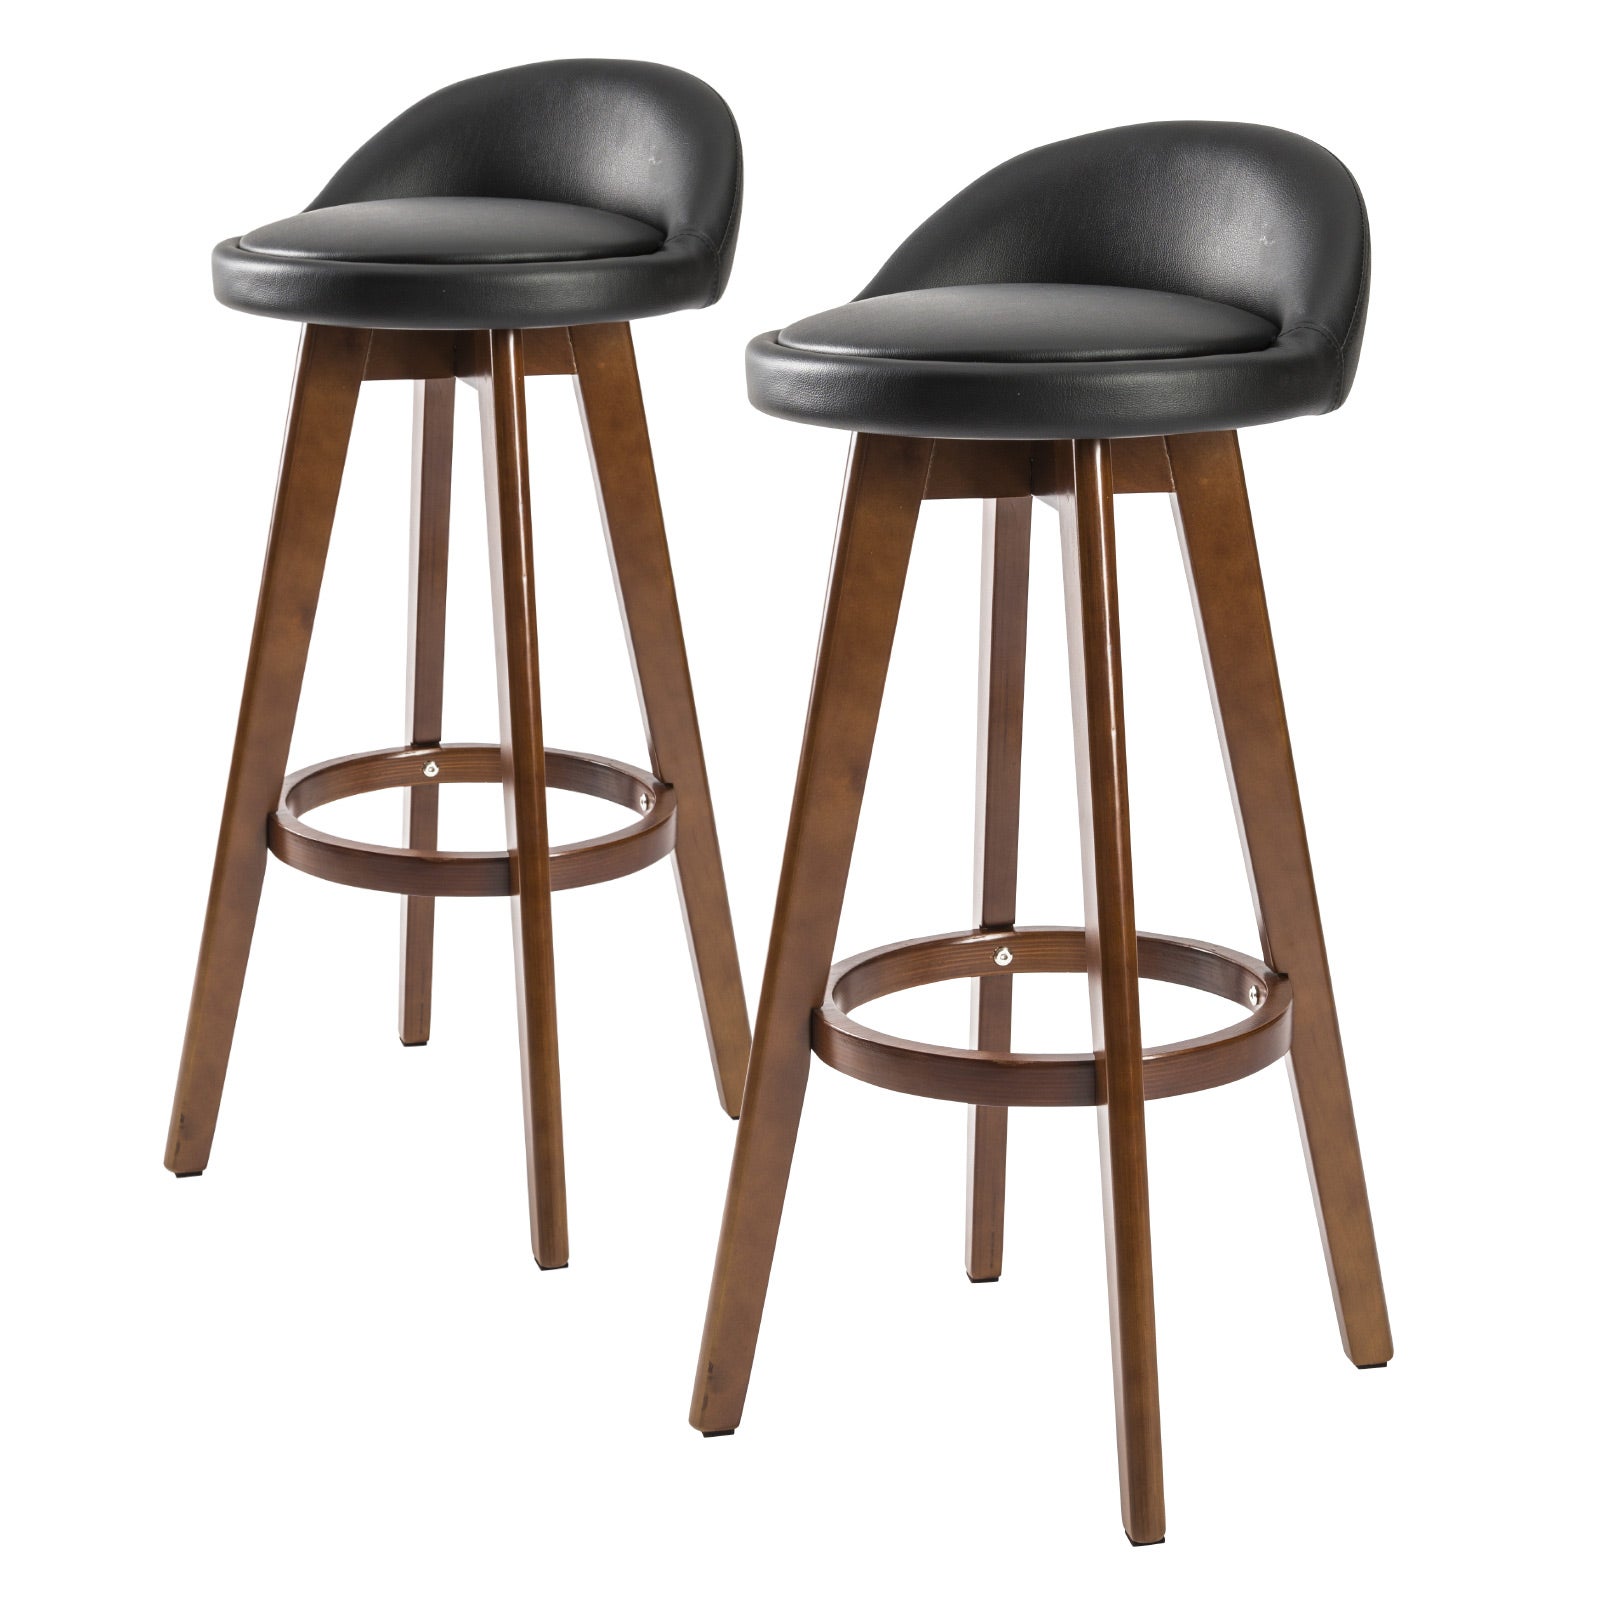 2X Wooden Bar Stool Dining Chair Leather LEILA 72cm BLACK BROWN